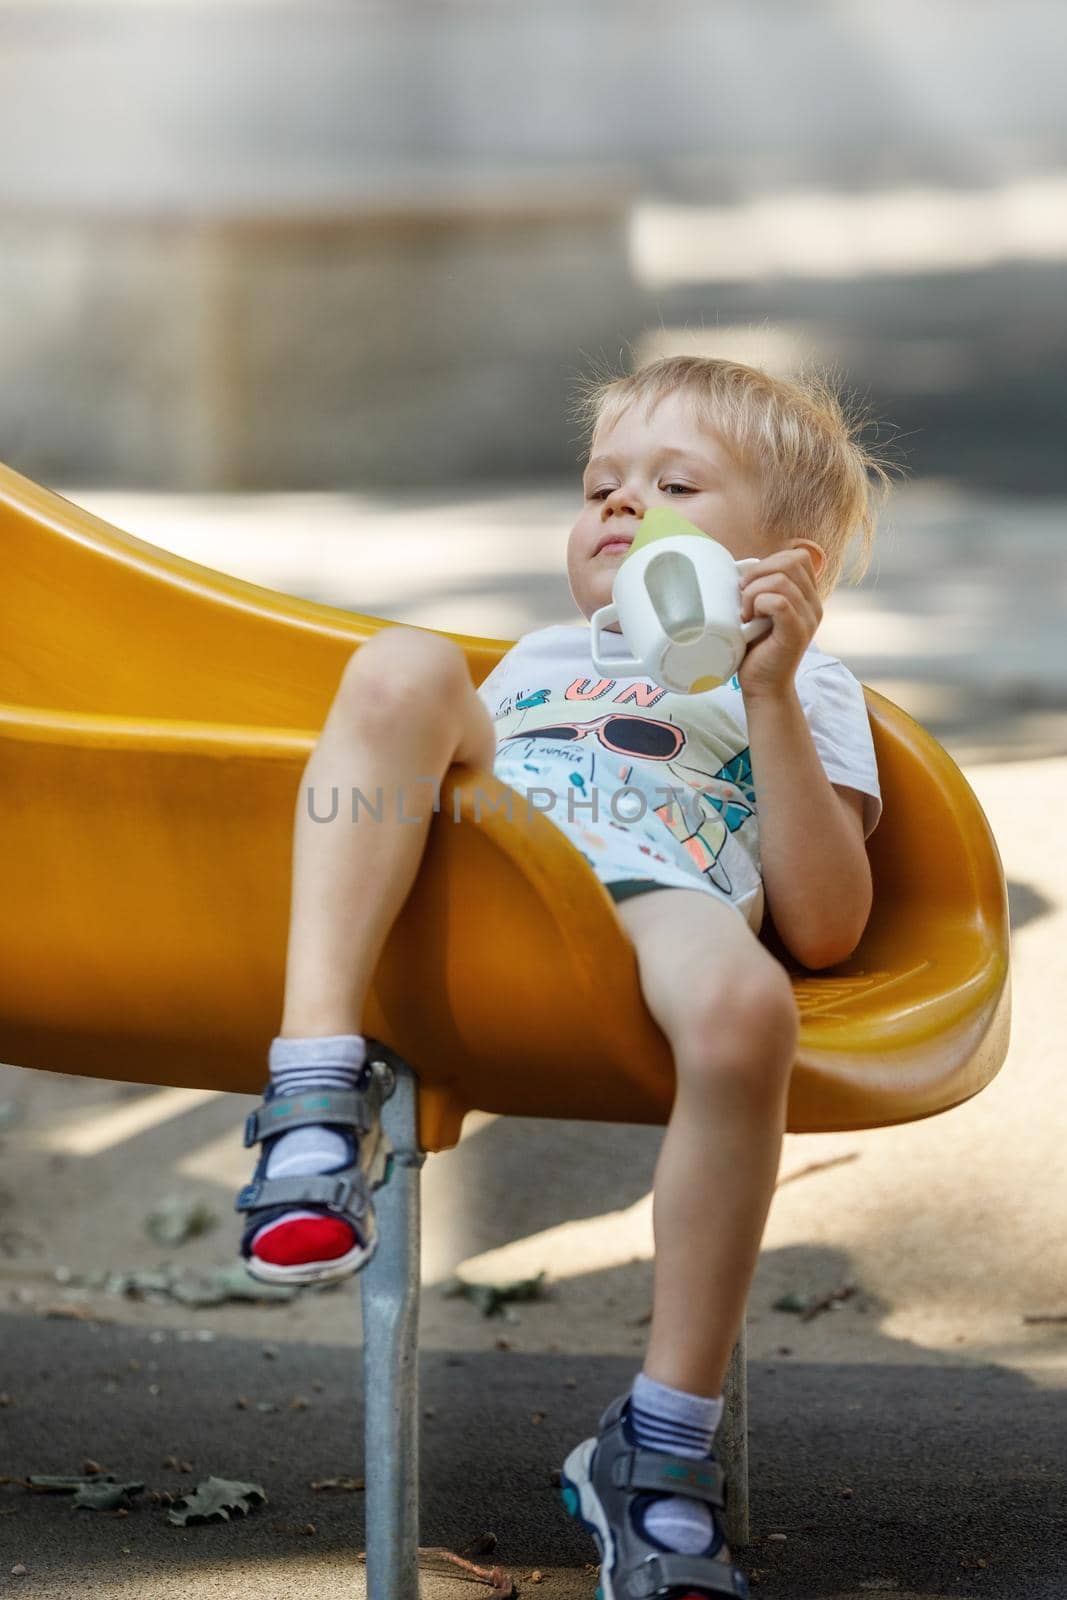 The little boy slips into a yellow plastic slide, his hair becomes eclectic, child sits down comfortably to calm and drink.